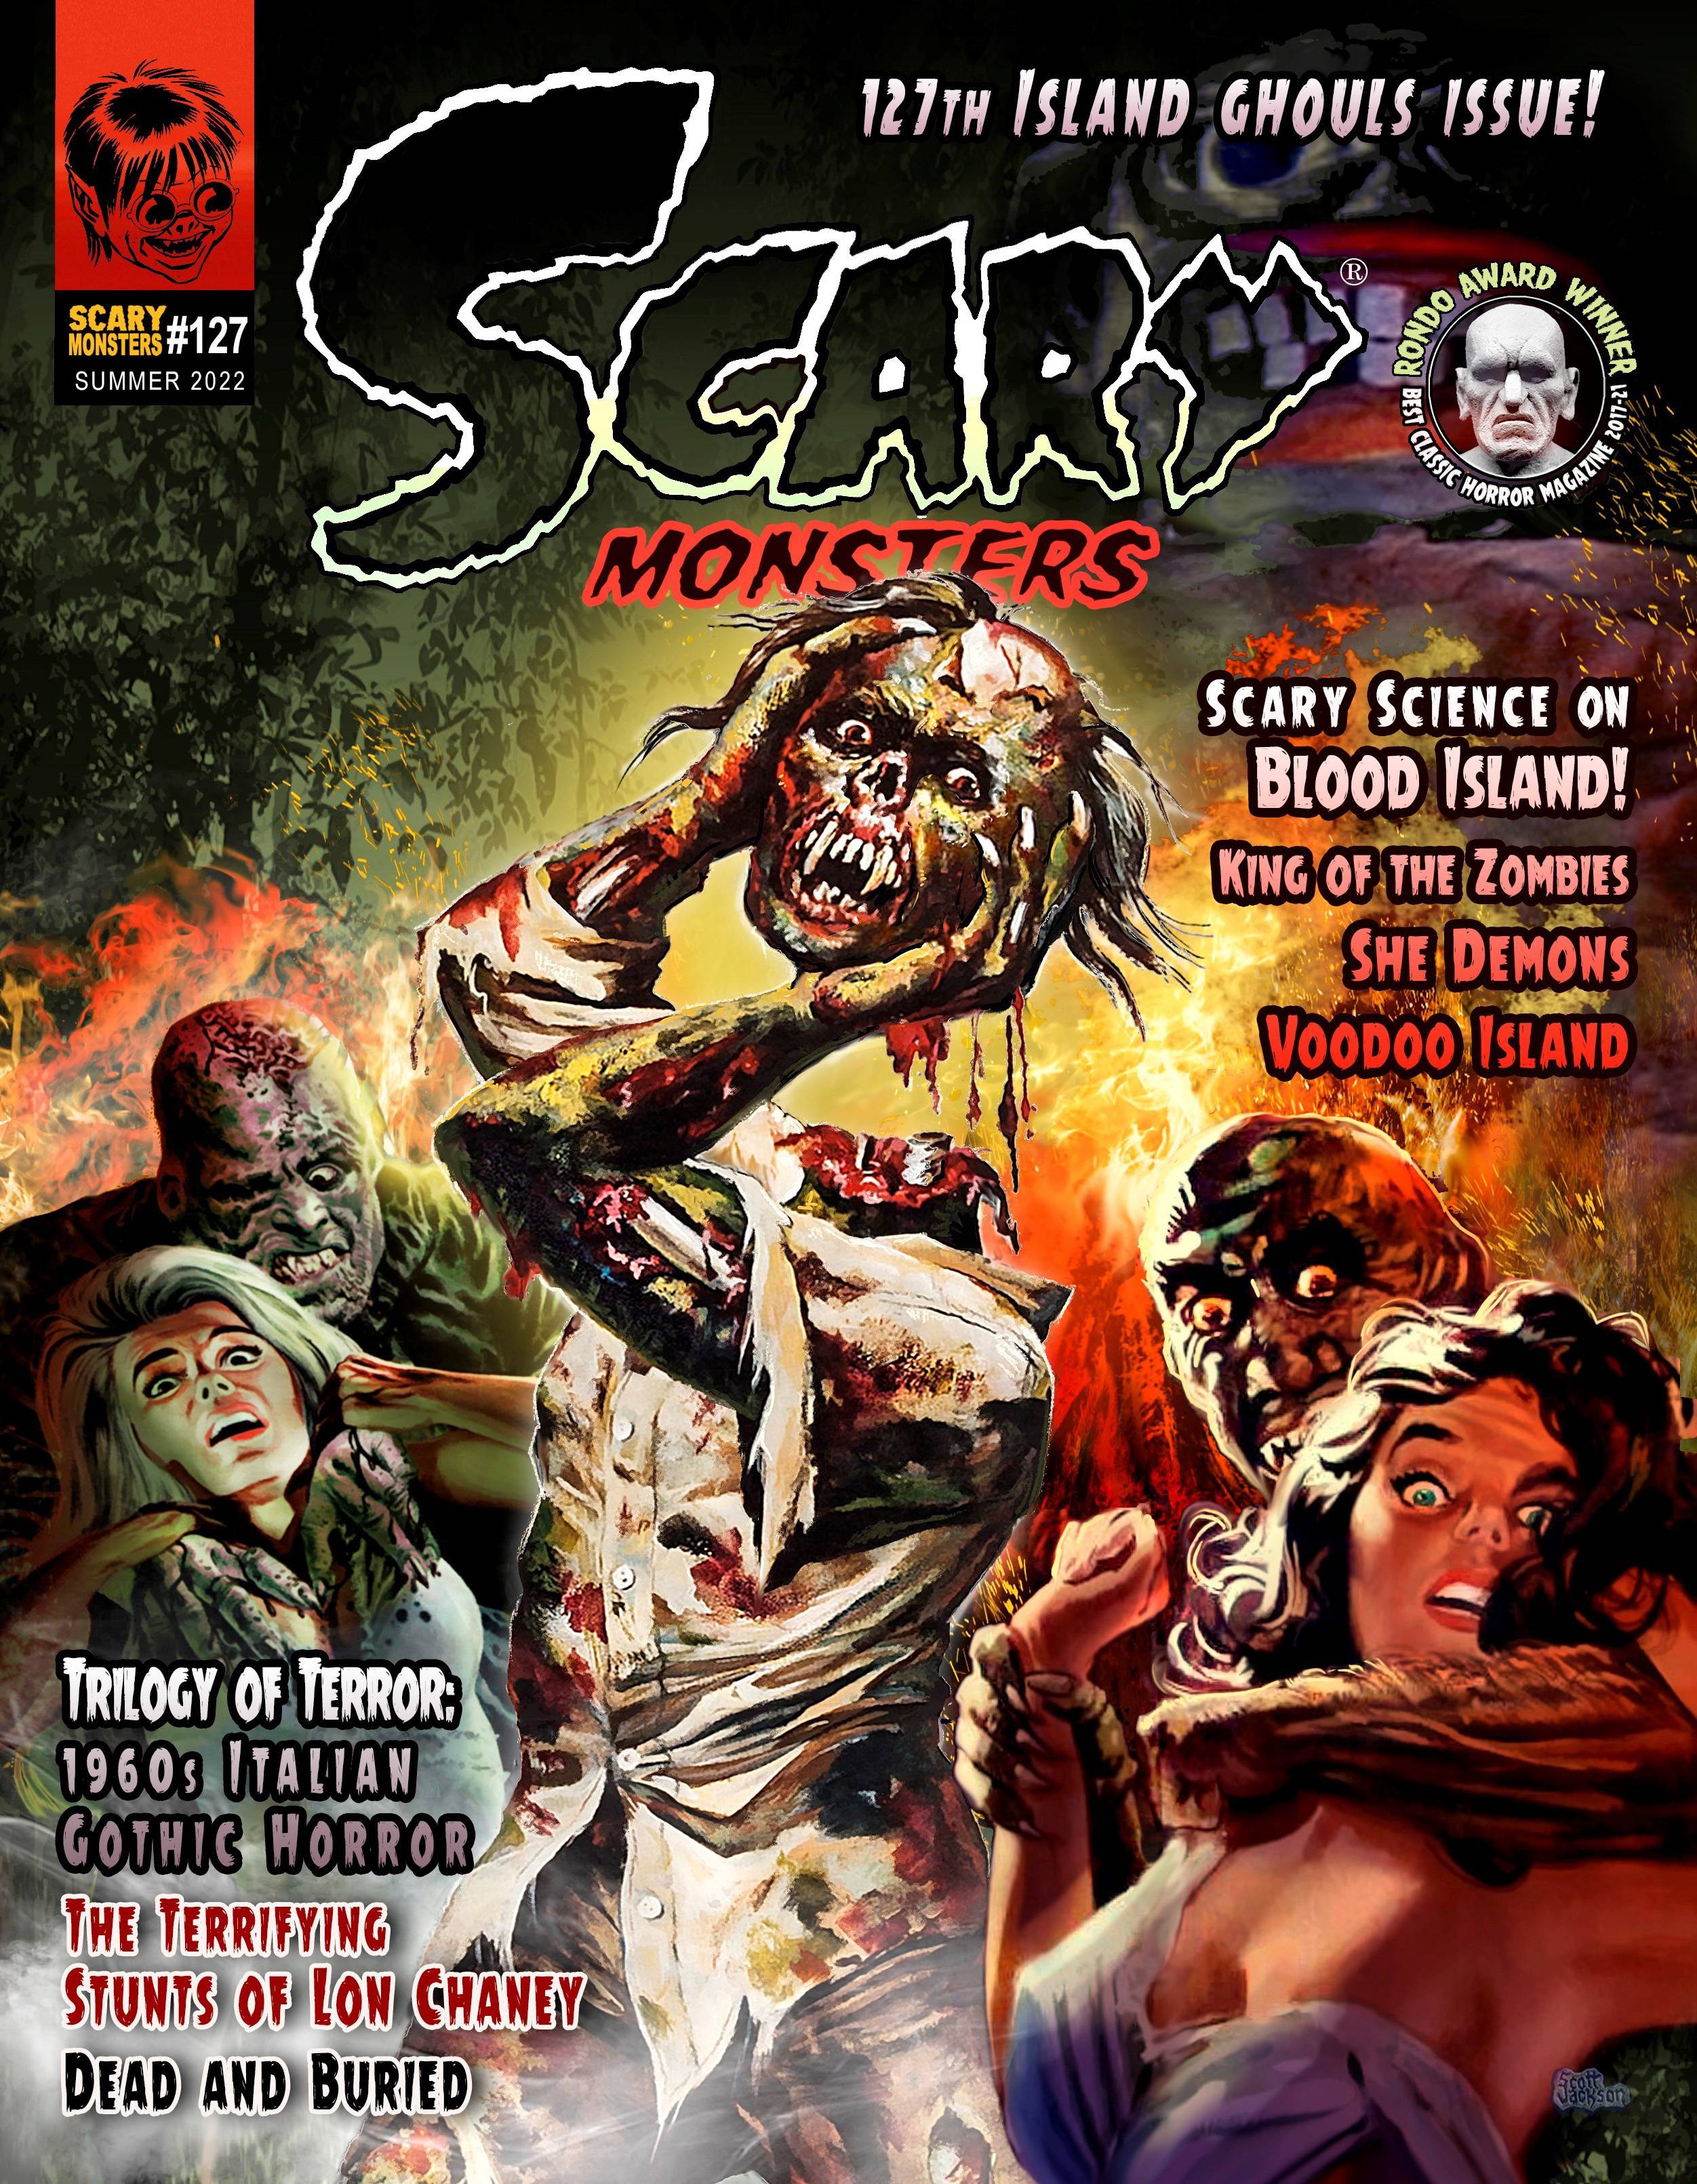 SCARY MONSTERS MAGAZINE #127